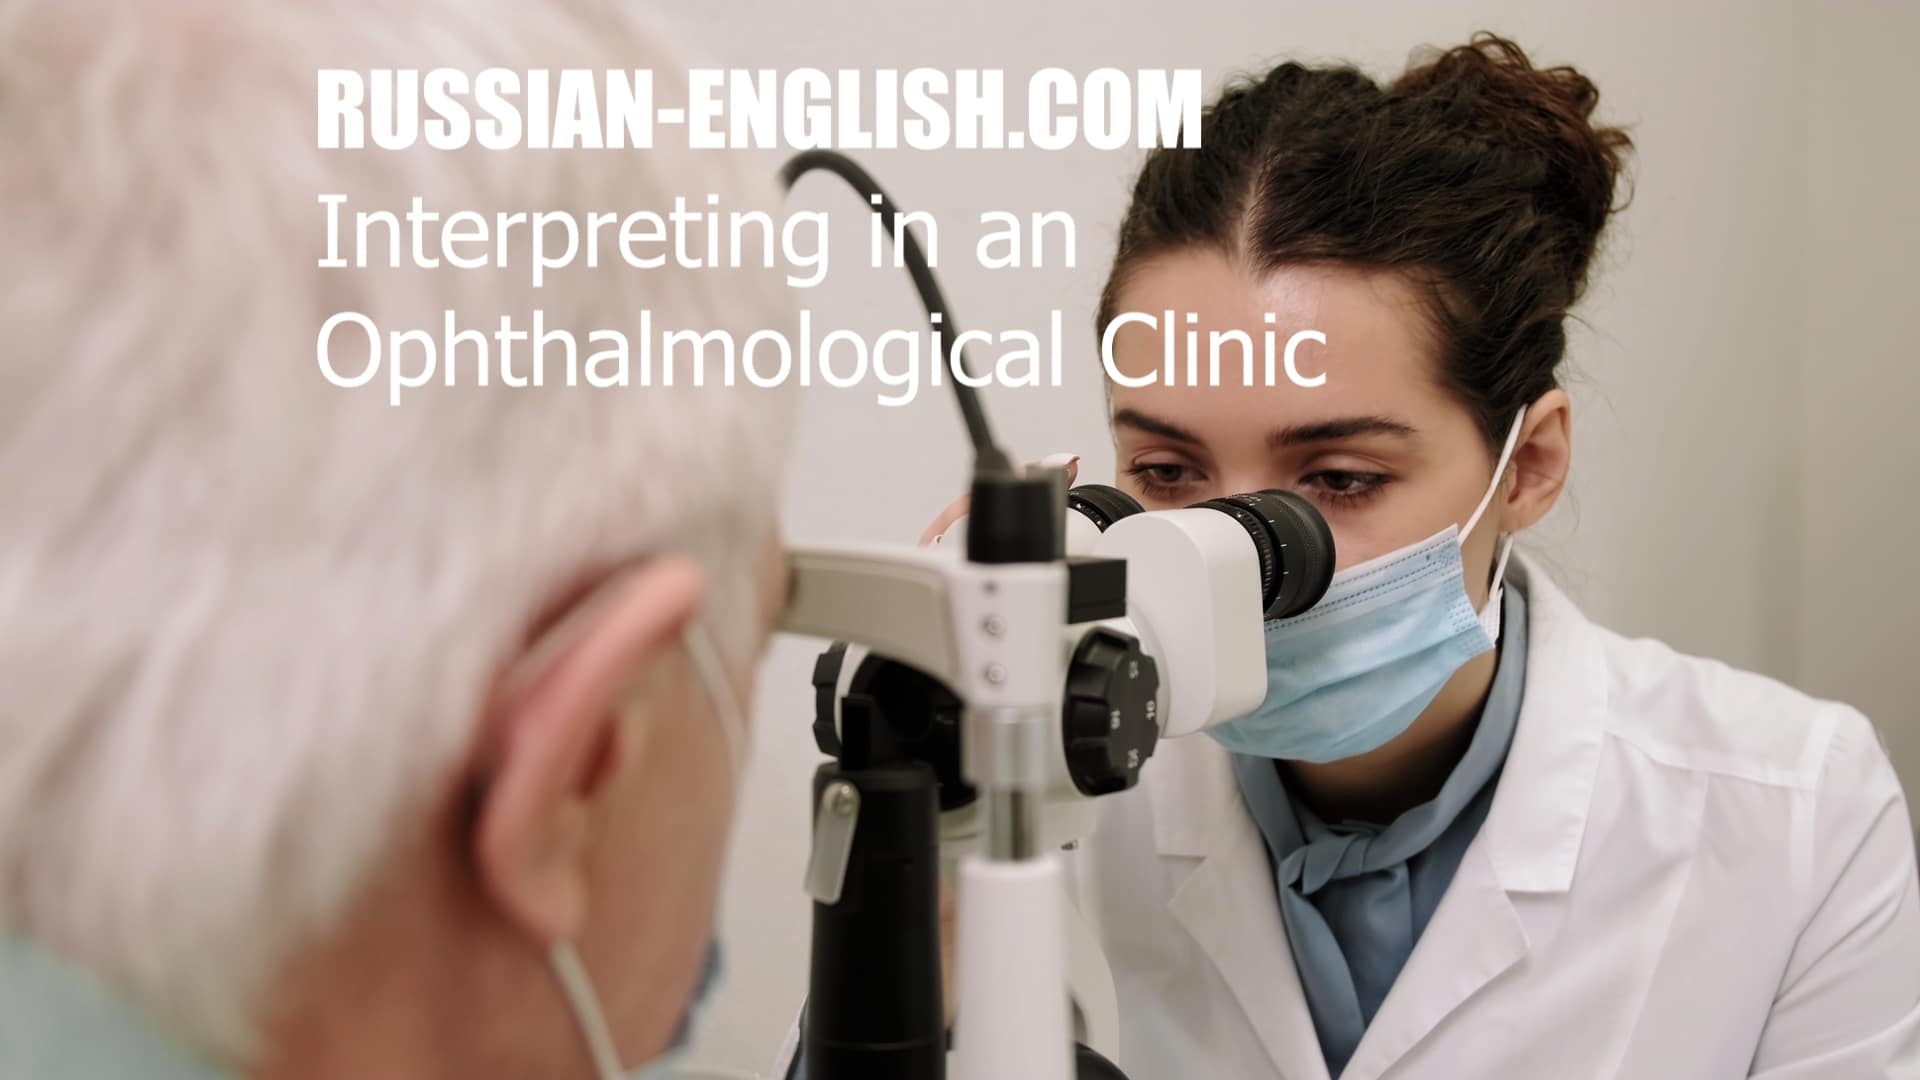 RUSSIAN-ENGLISH.COM Interpreting in an Ophthalmological Clinic